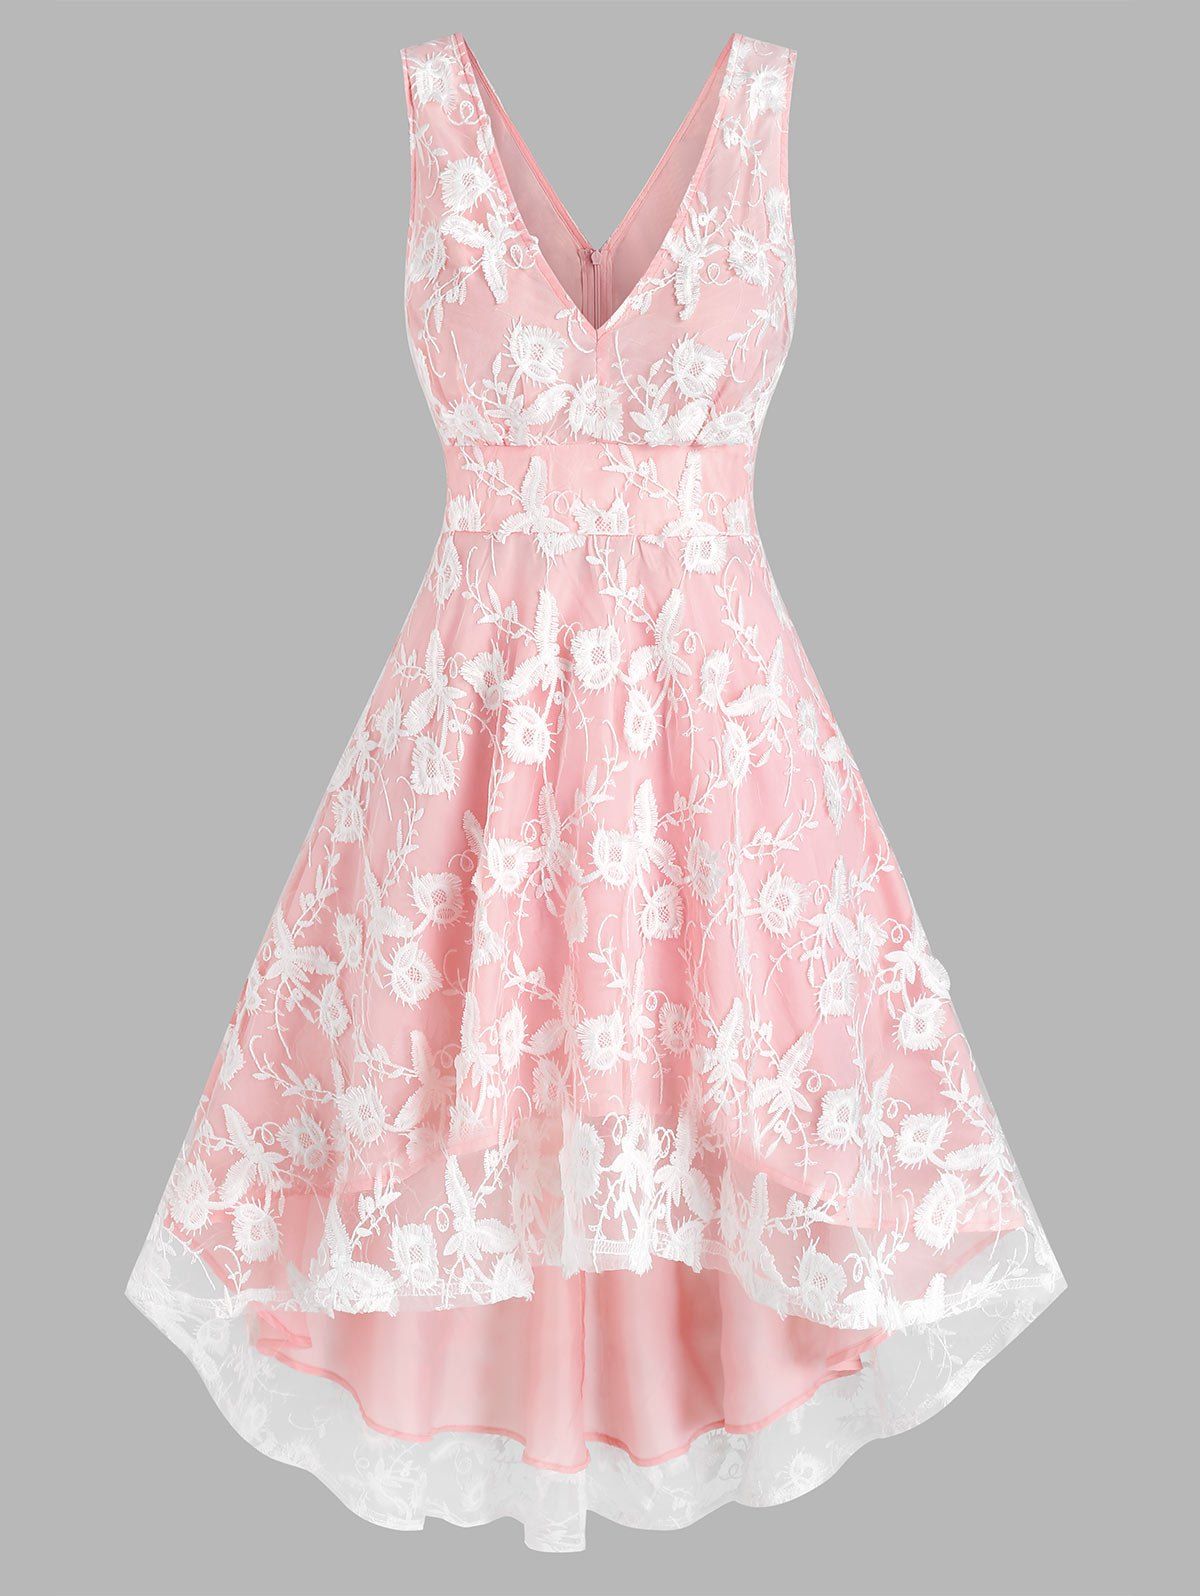 Embroidered Low Cut High Low Midi Cocktail Dress - LIGHT PINK L